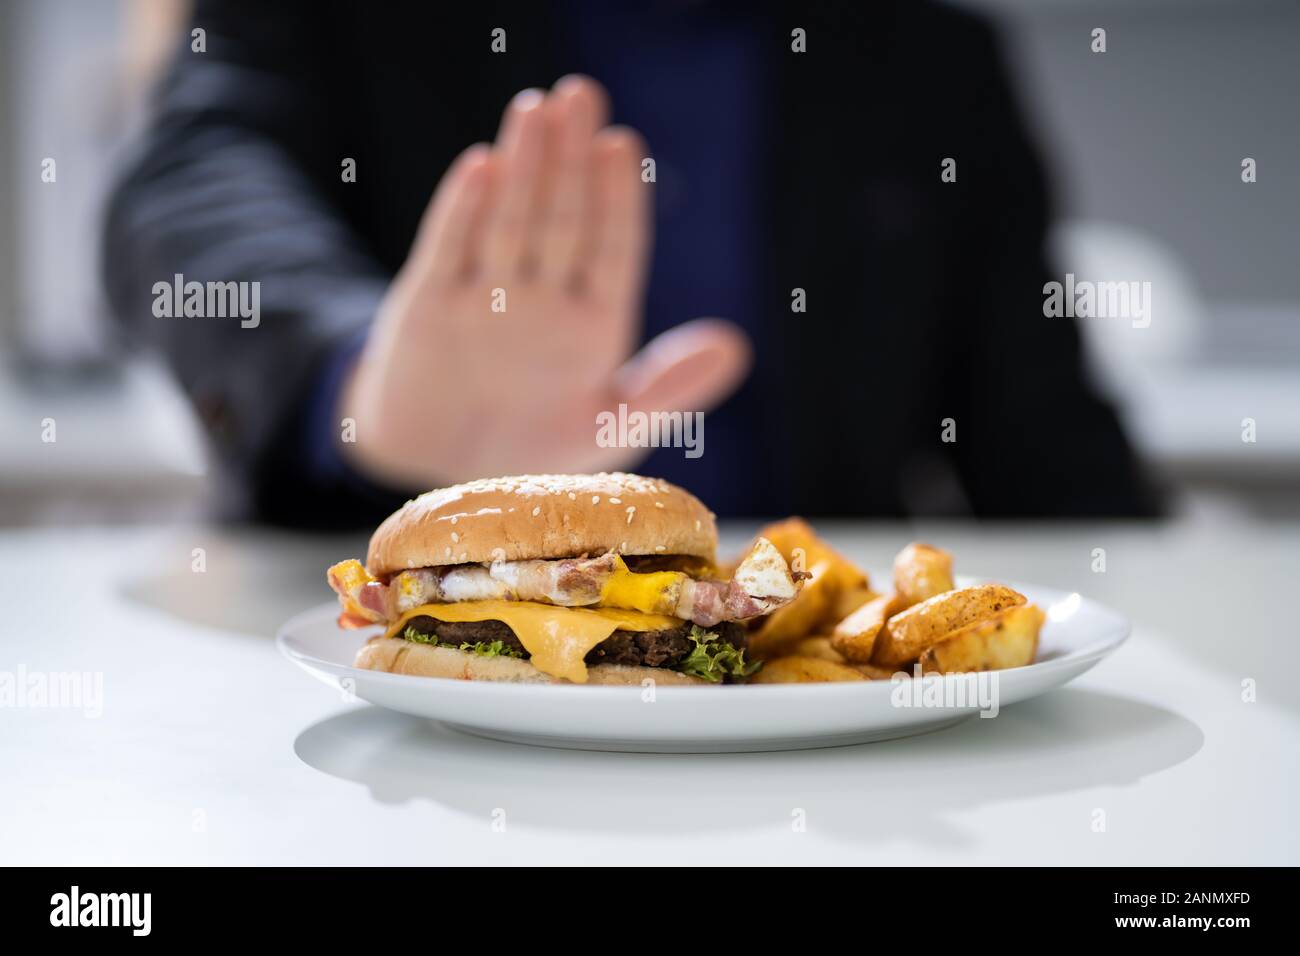 Close-up Of A Man's Hand Refusing To Eat Fest Food Burger Stock Photo